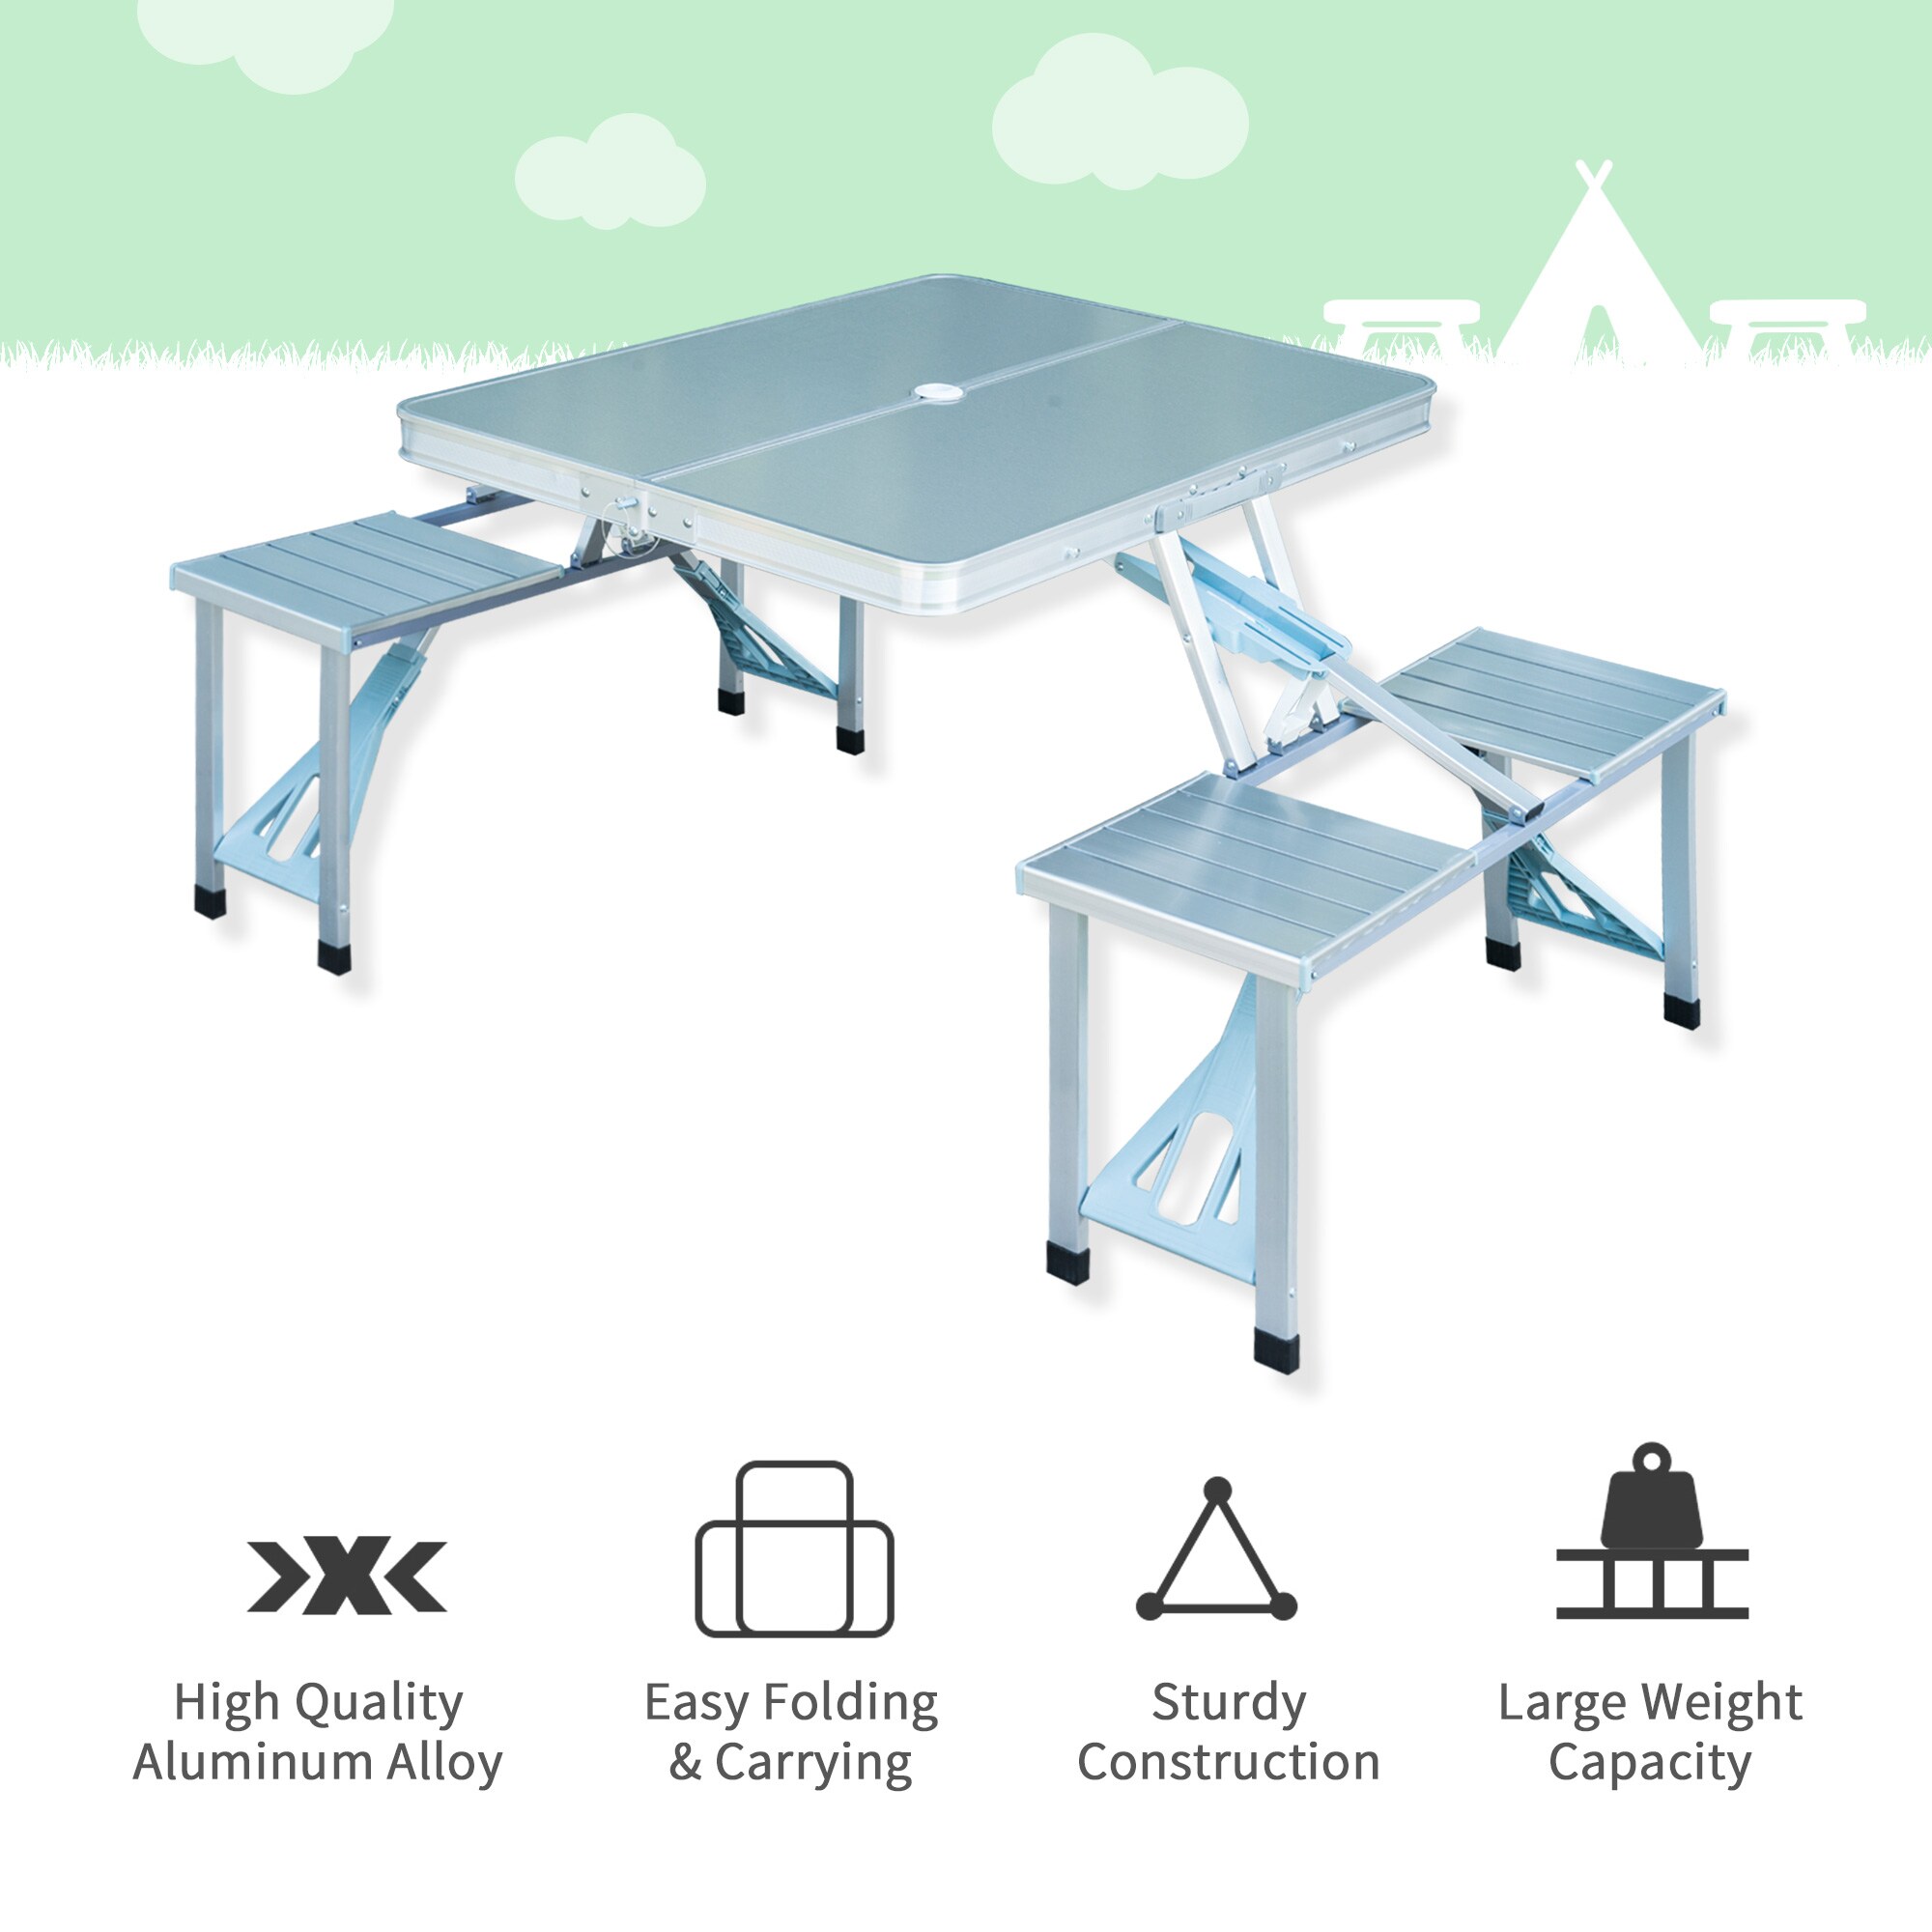 Outsunny Aluminum Folding Picnic Table Outdoor Indoor Desk w/Carrying Bag 